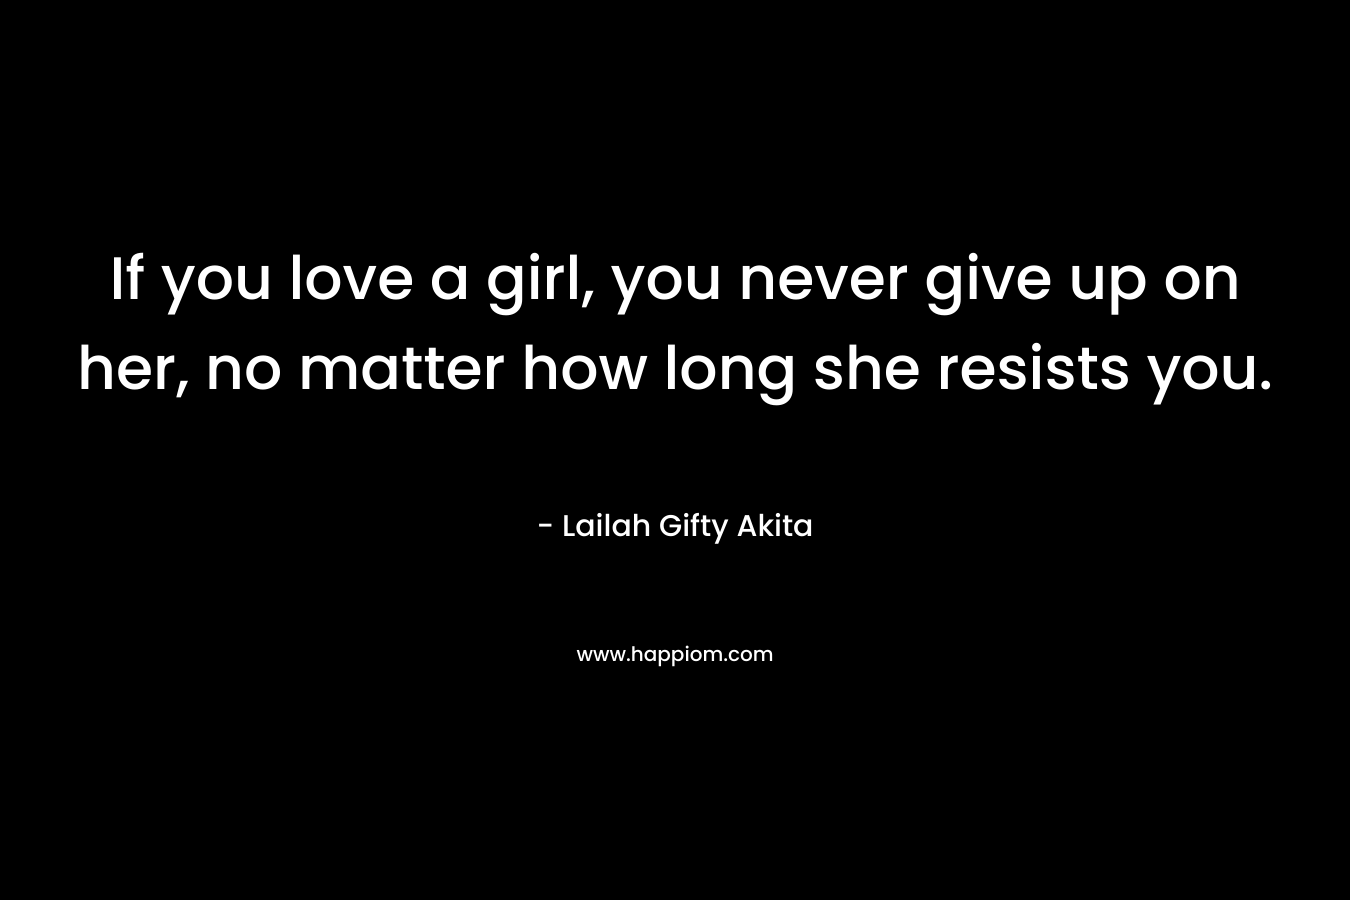 If you love a girl, you never give up on her, no matter how long she resists you. – Lailah Gifty Akita